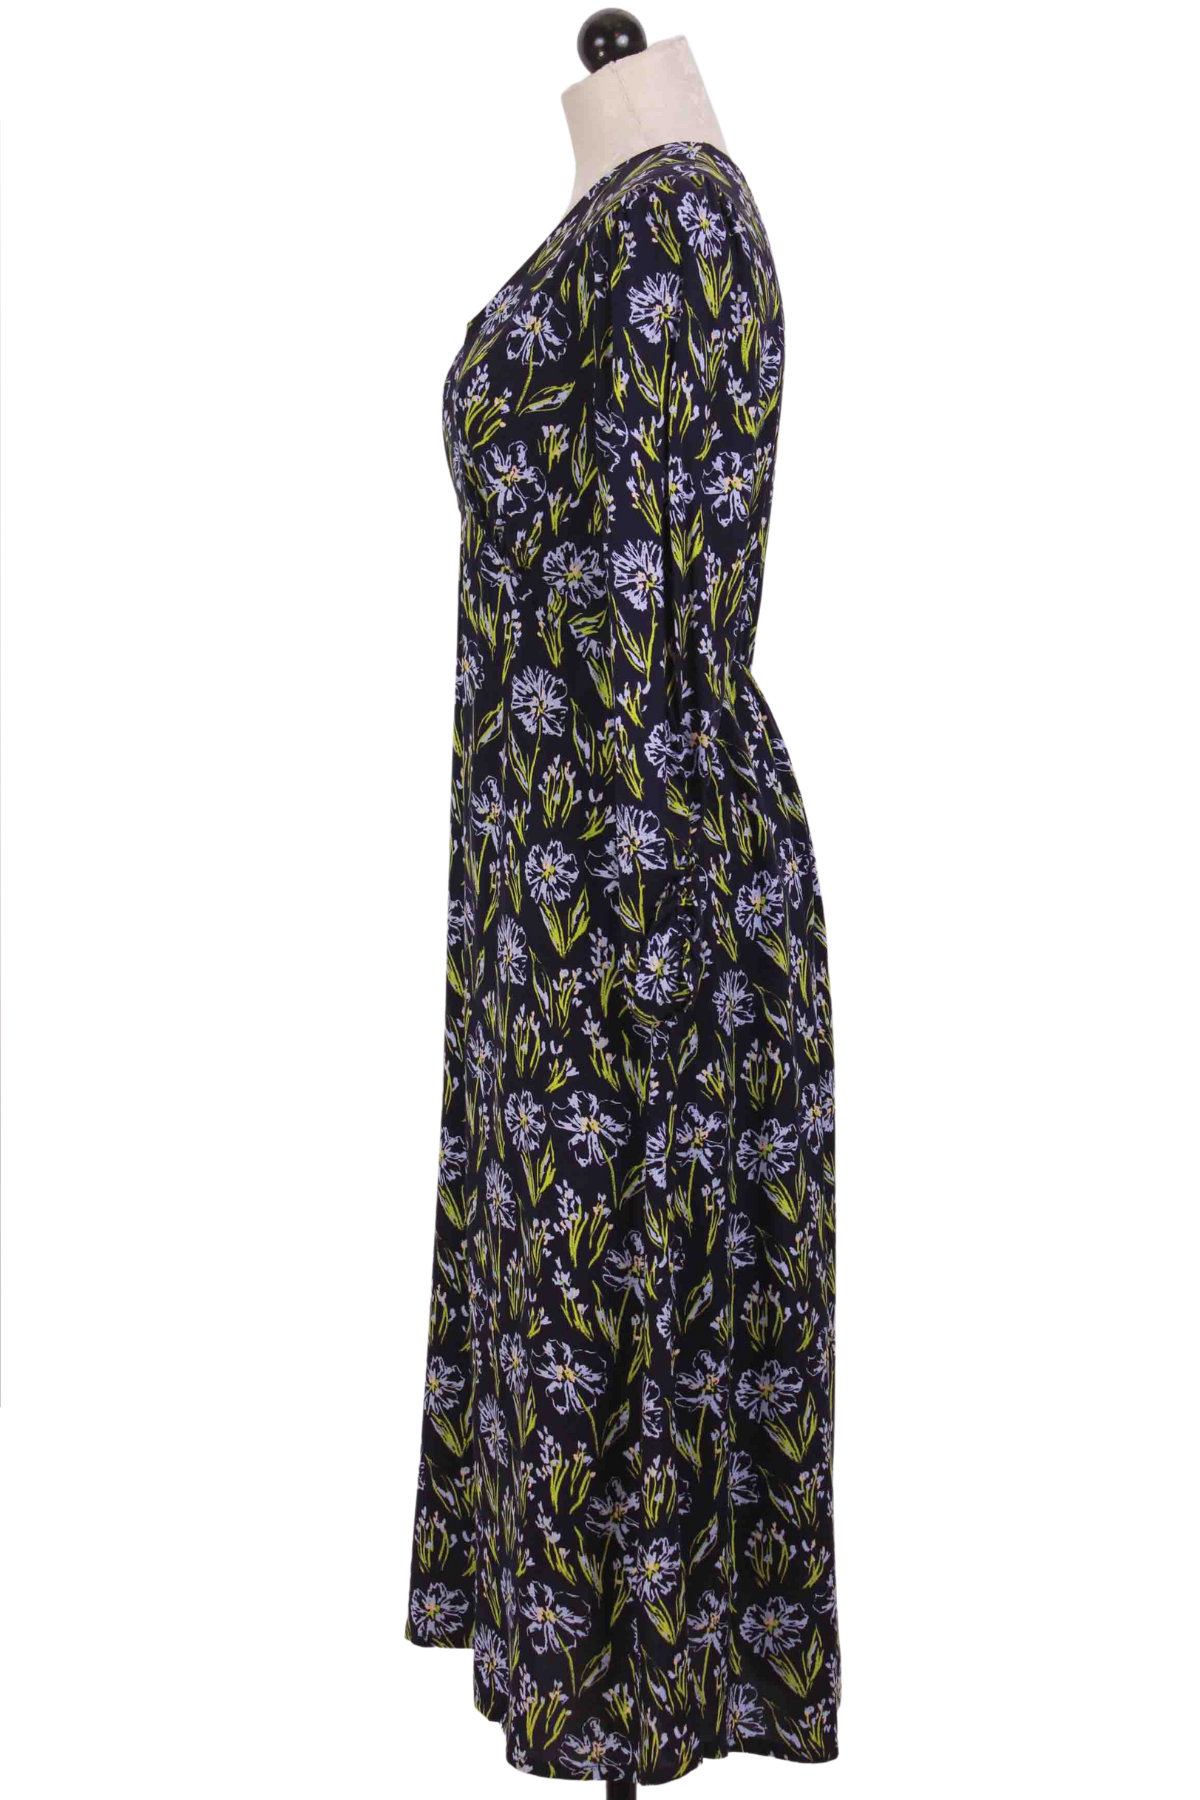 side view of Long Sleeve Floral Ruched Sleeve V Neck Dress by Compania Fantastica